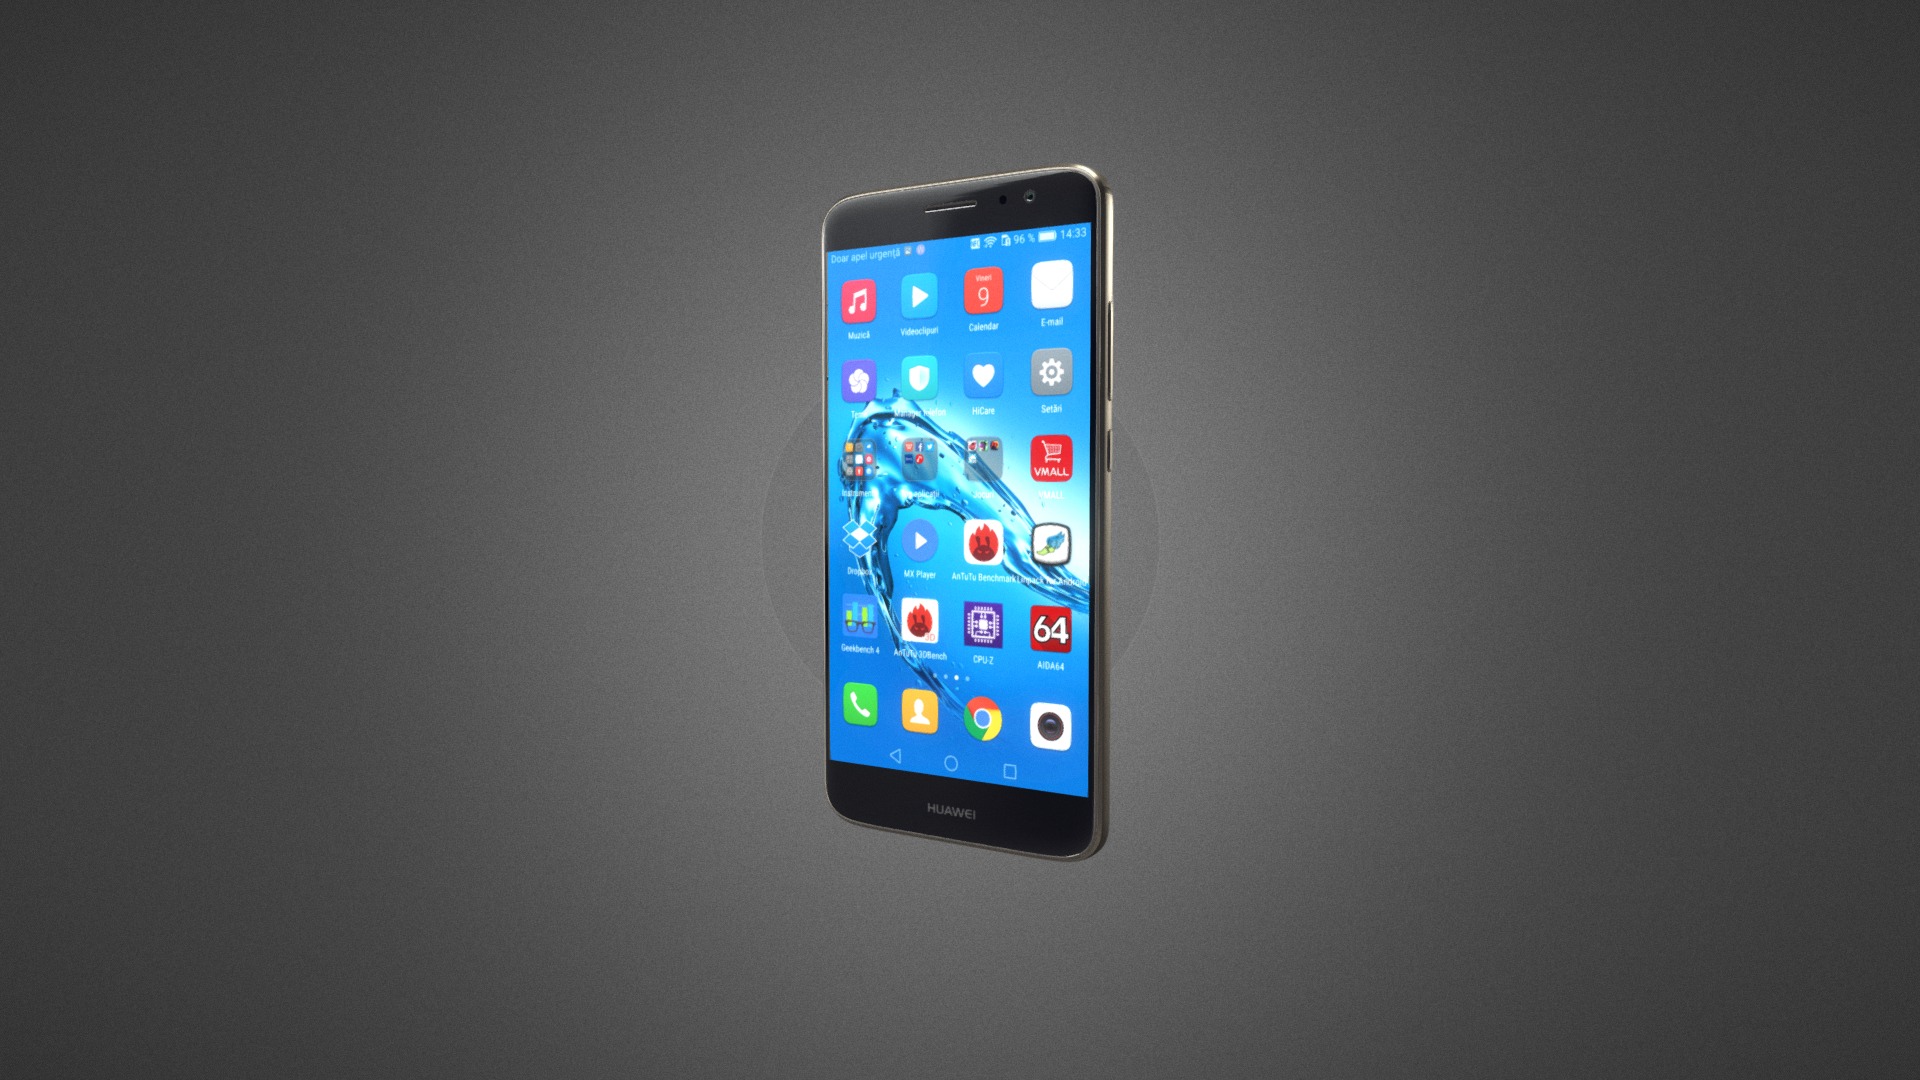 3D model Huawei Nova Plus for Element 3D - This is a 3D model of the Huawei Nova Plus for Element 3D. The 3D model is about a black smartphone with a blue screen.